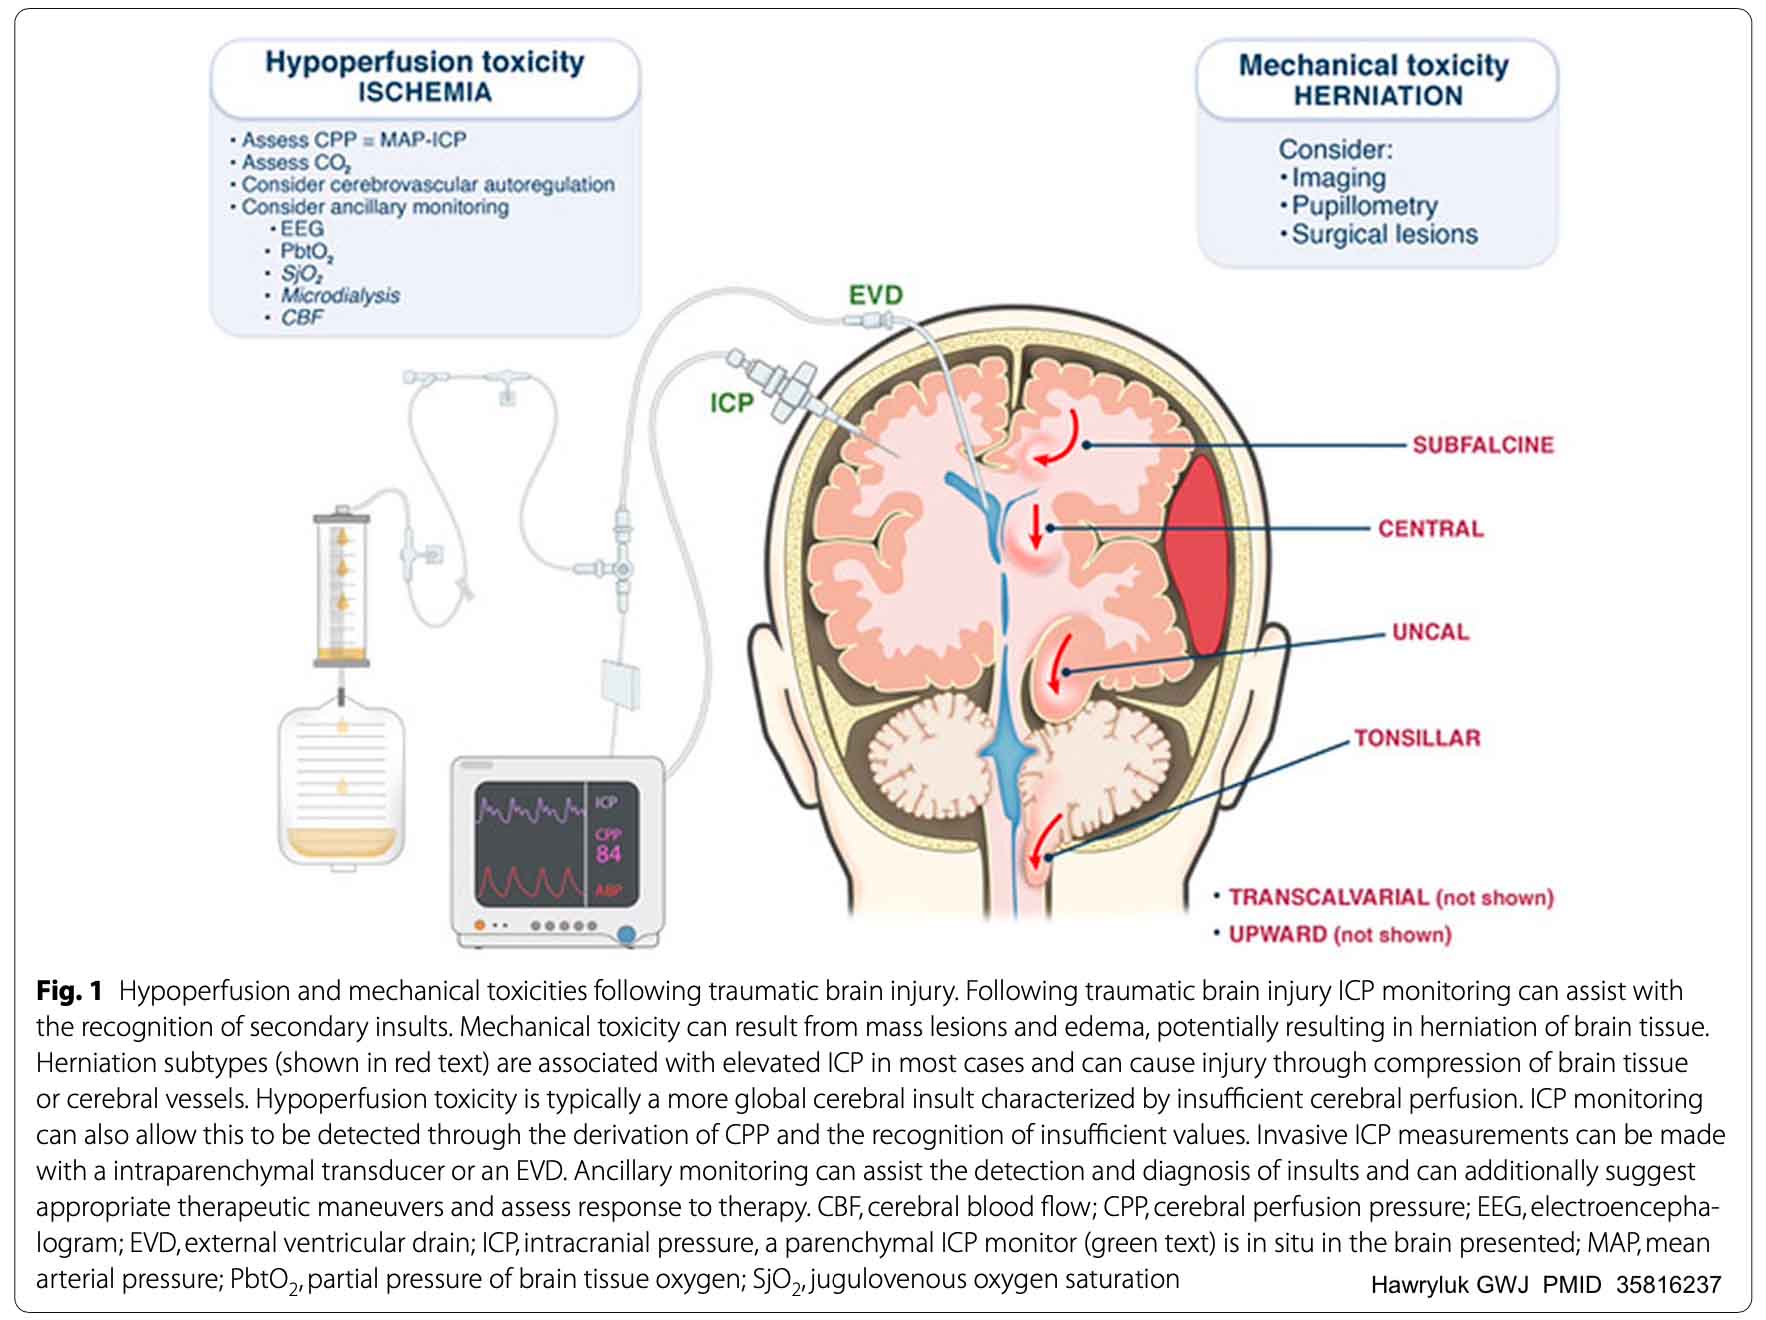 A Trial of Intracranial-Pressure Monitoring in Traumatic Brain Injury